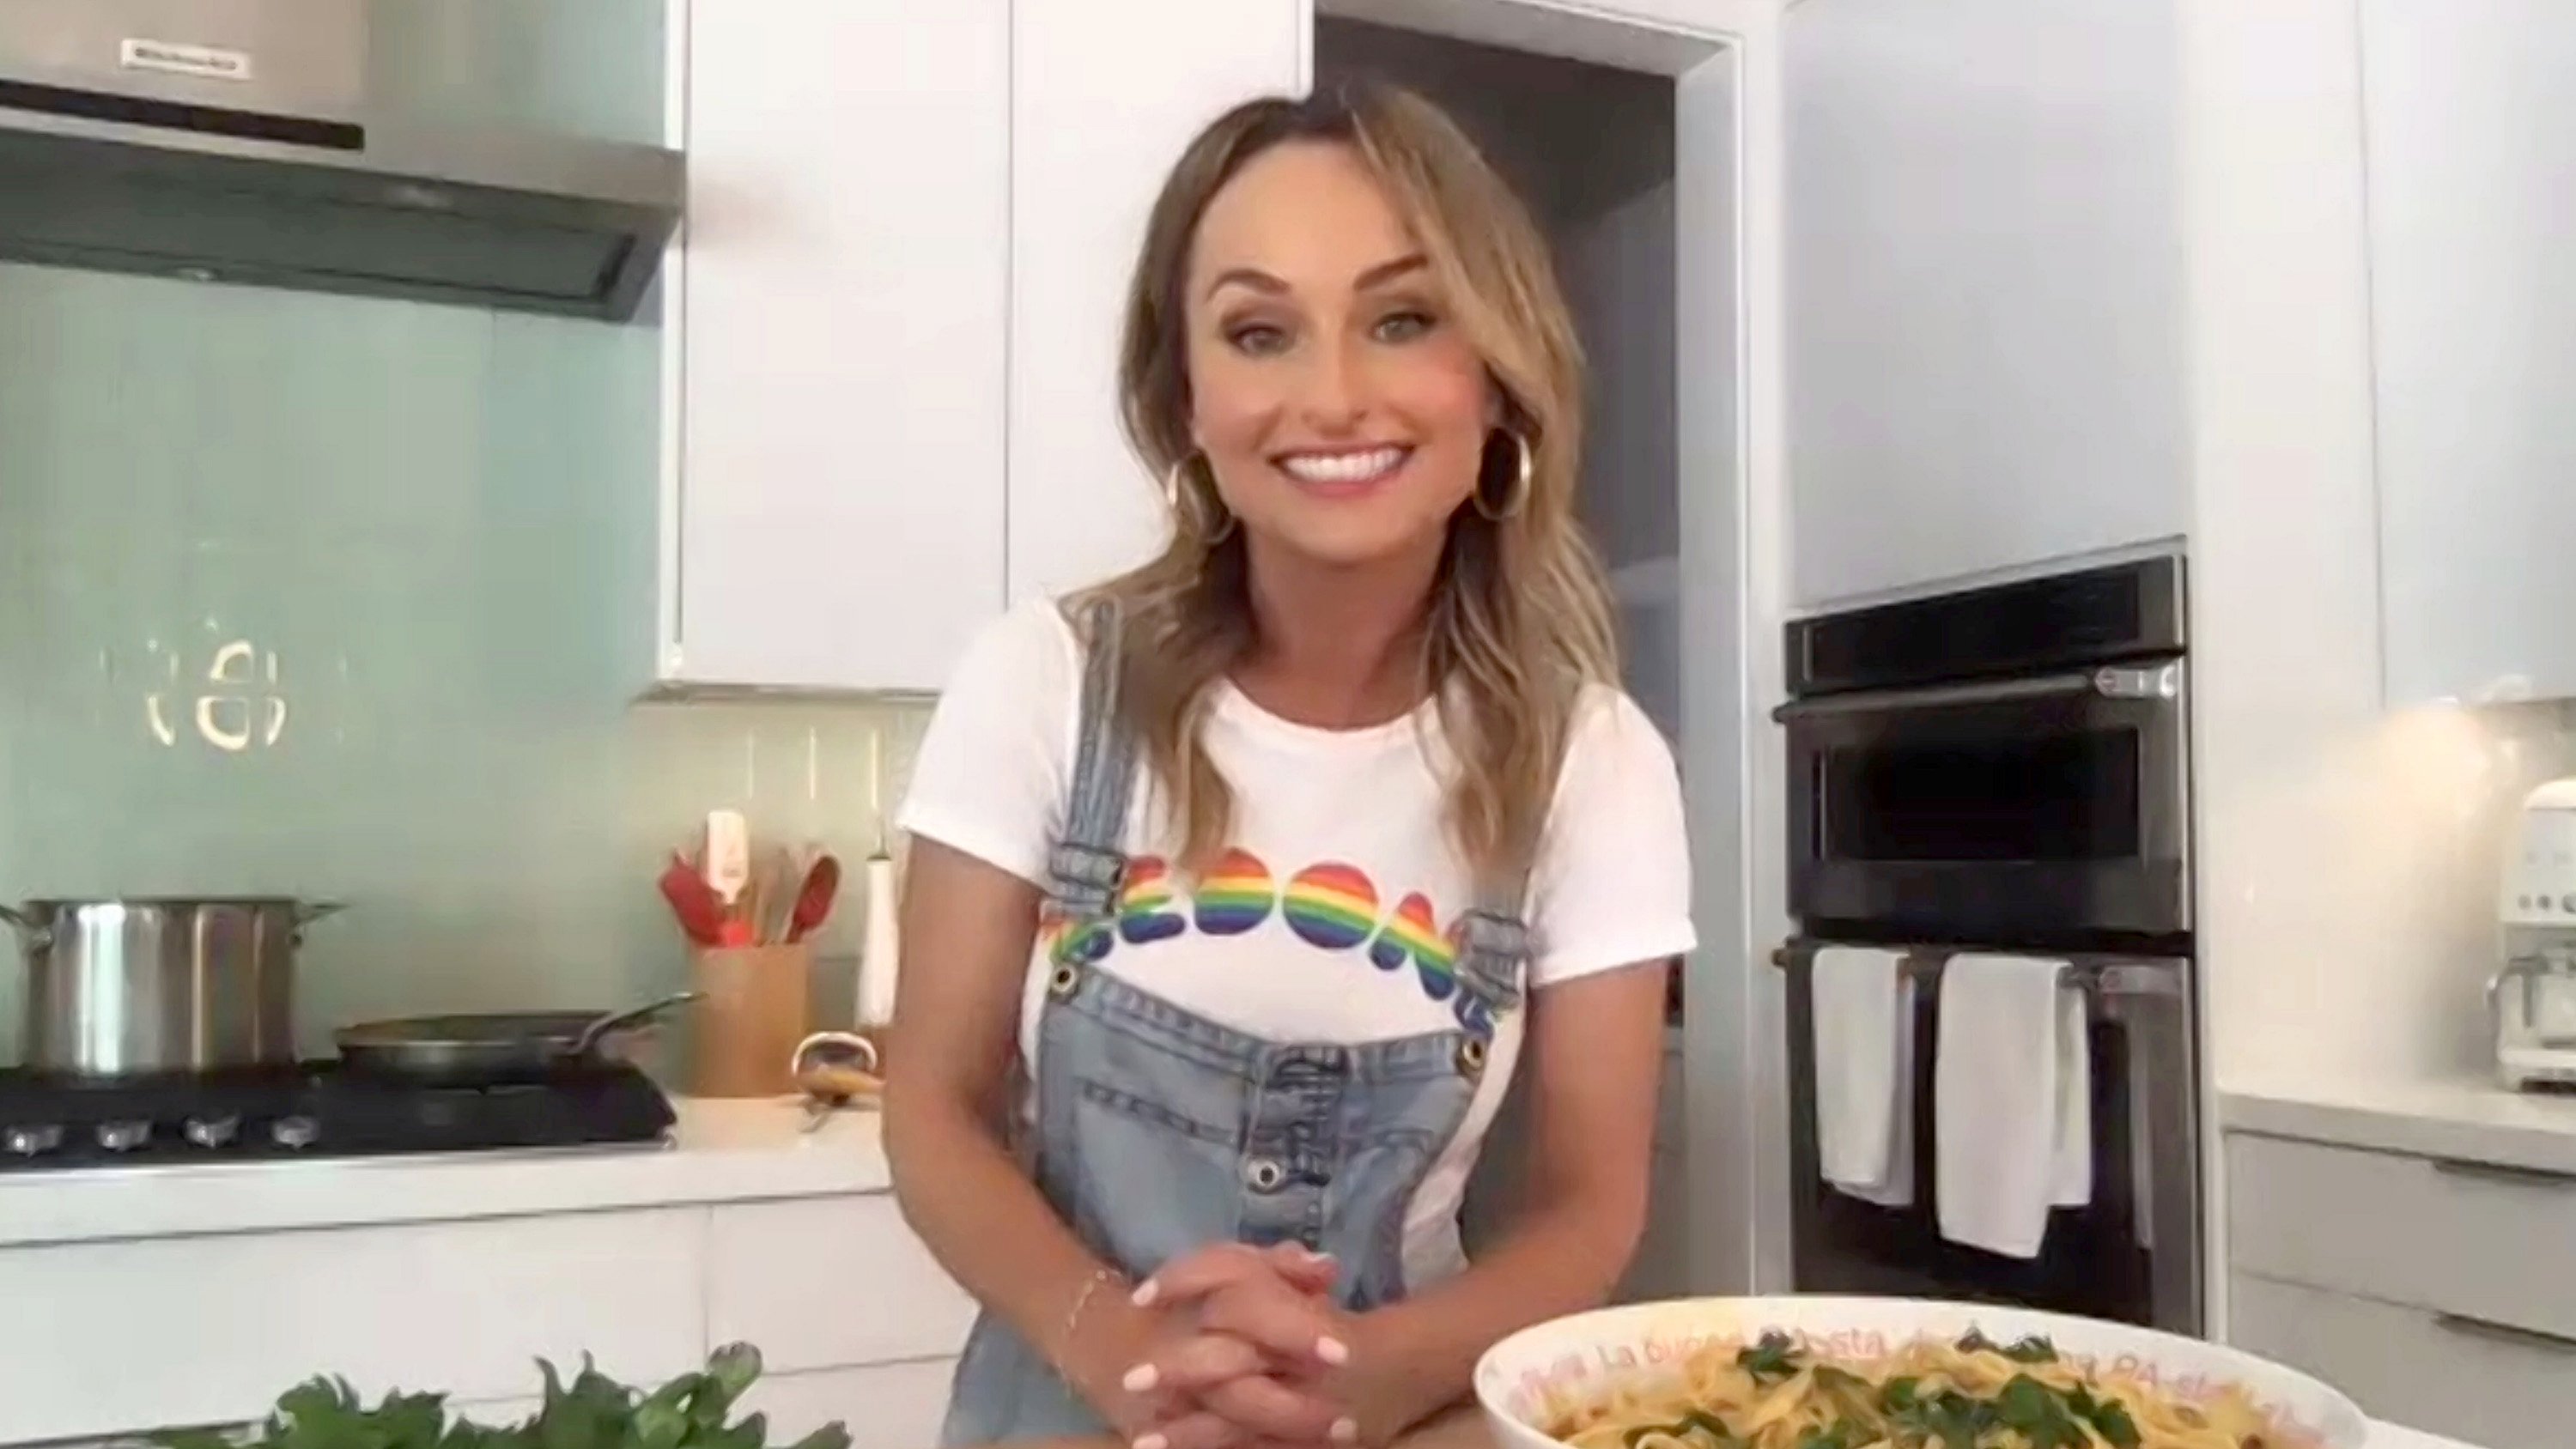 Celebrity chef Giada De Laurentiis appears in denim overalls and a T-shirt during a 2020 virtual Food Network event.